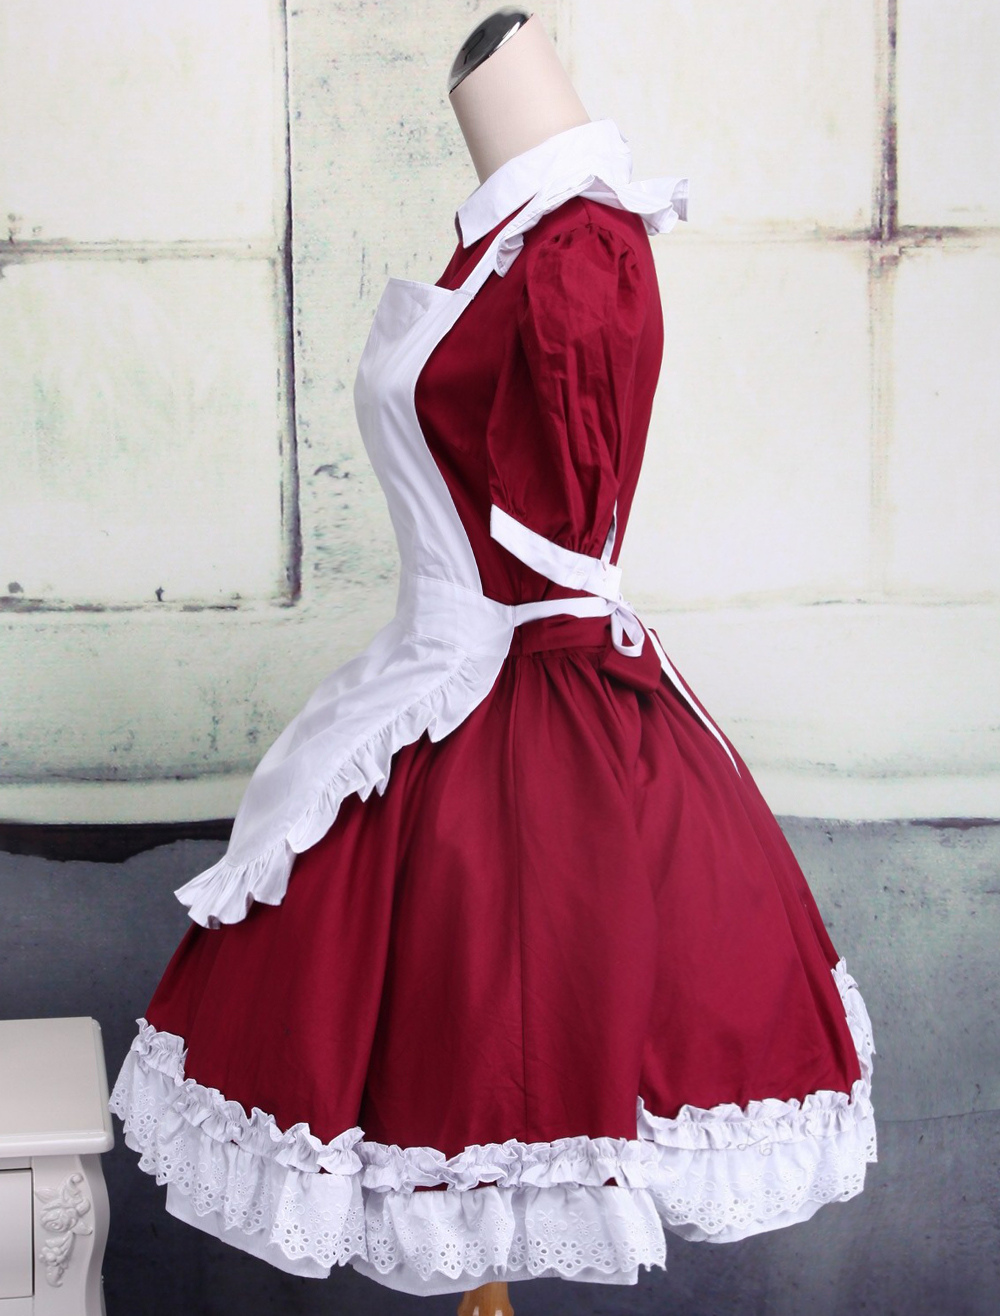 Cotton Dark Red And White Cosplay Lolita Dress With Apron - Milanoo.com